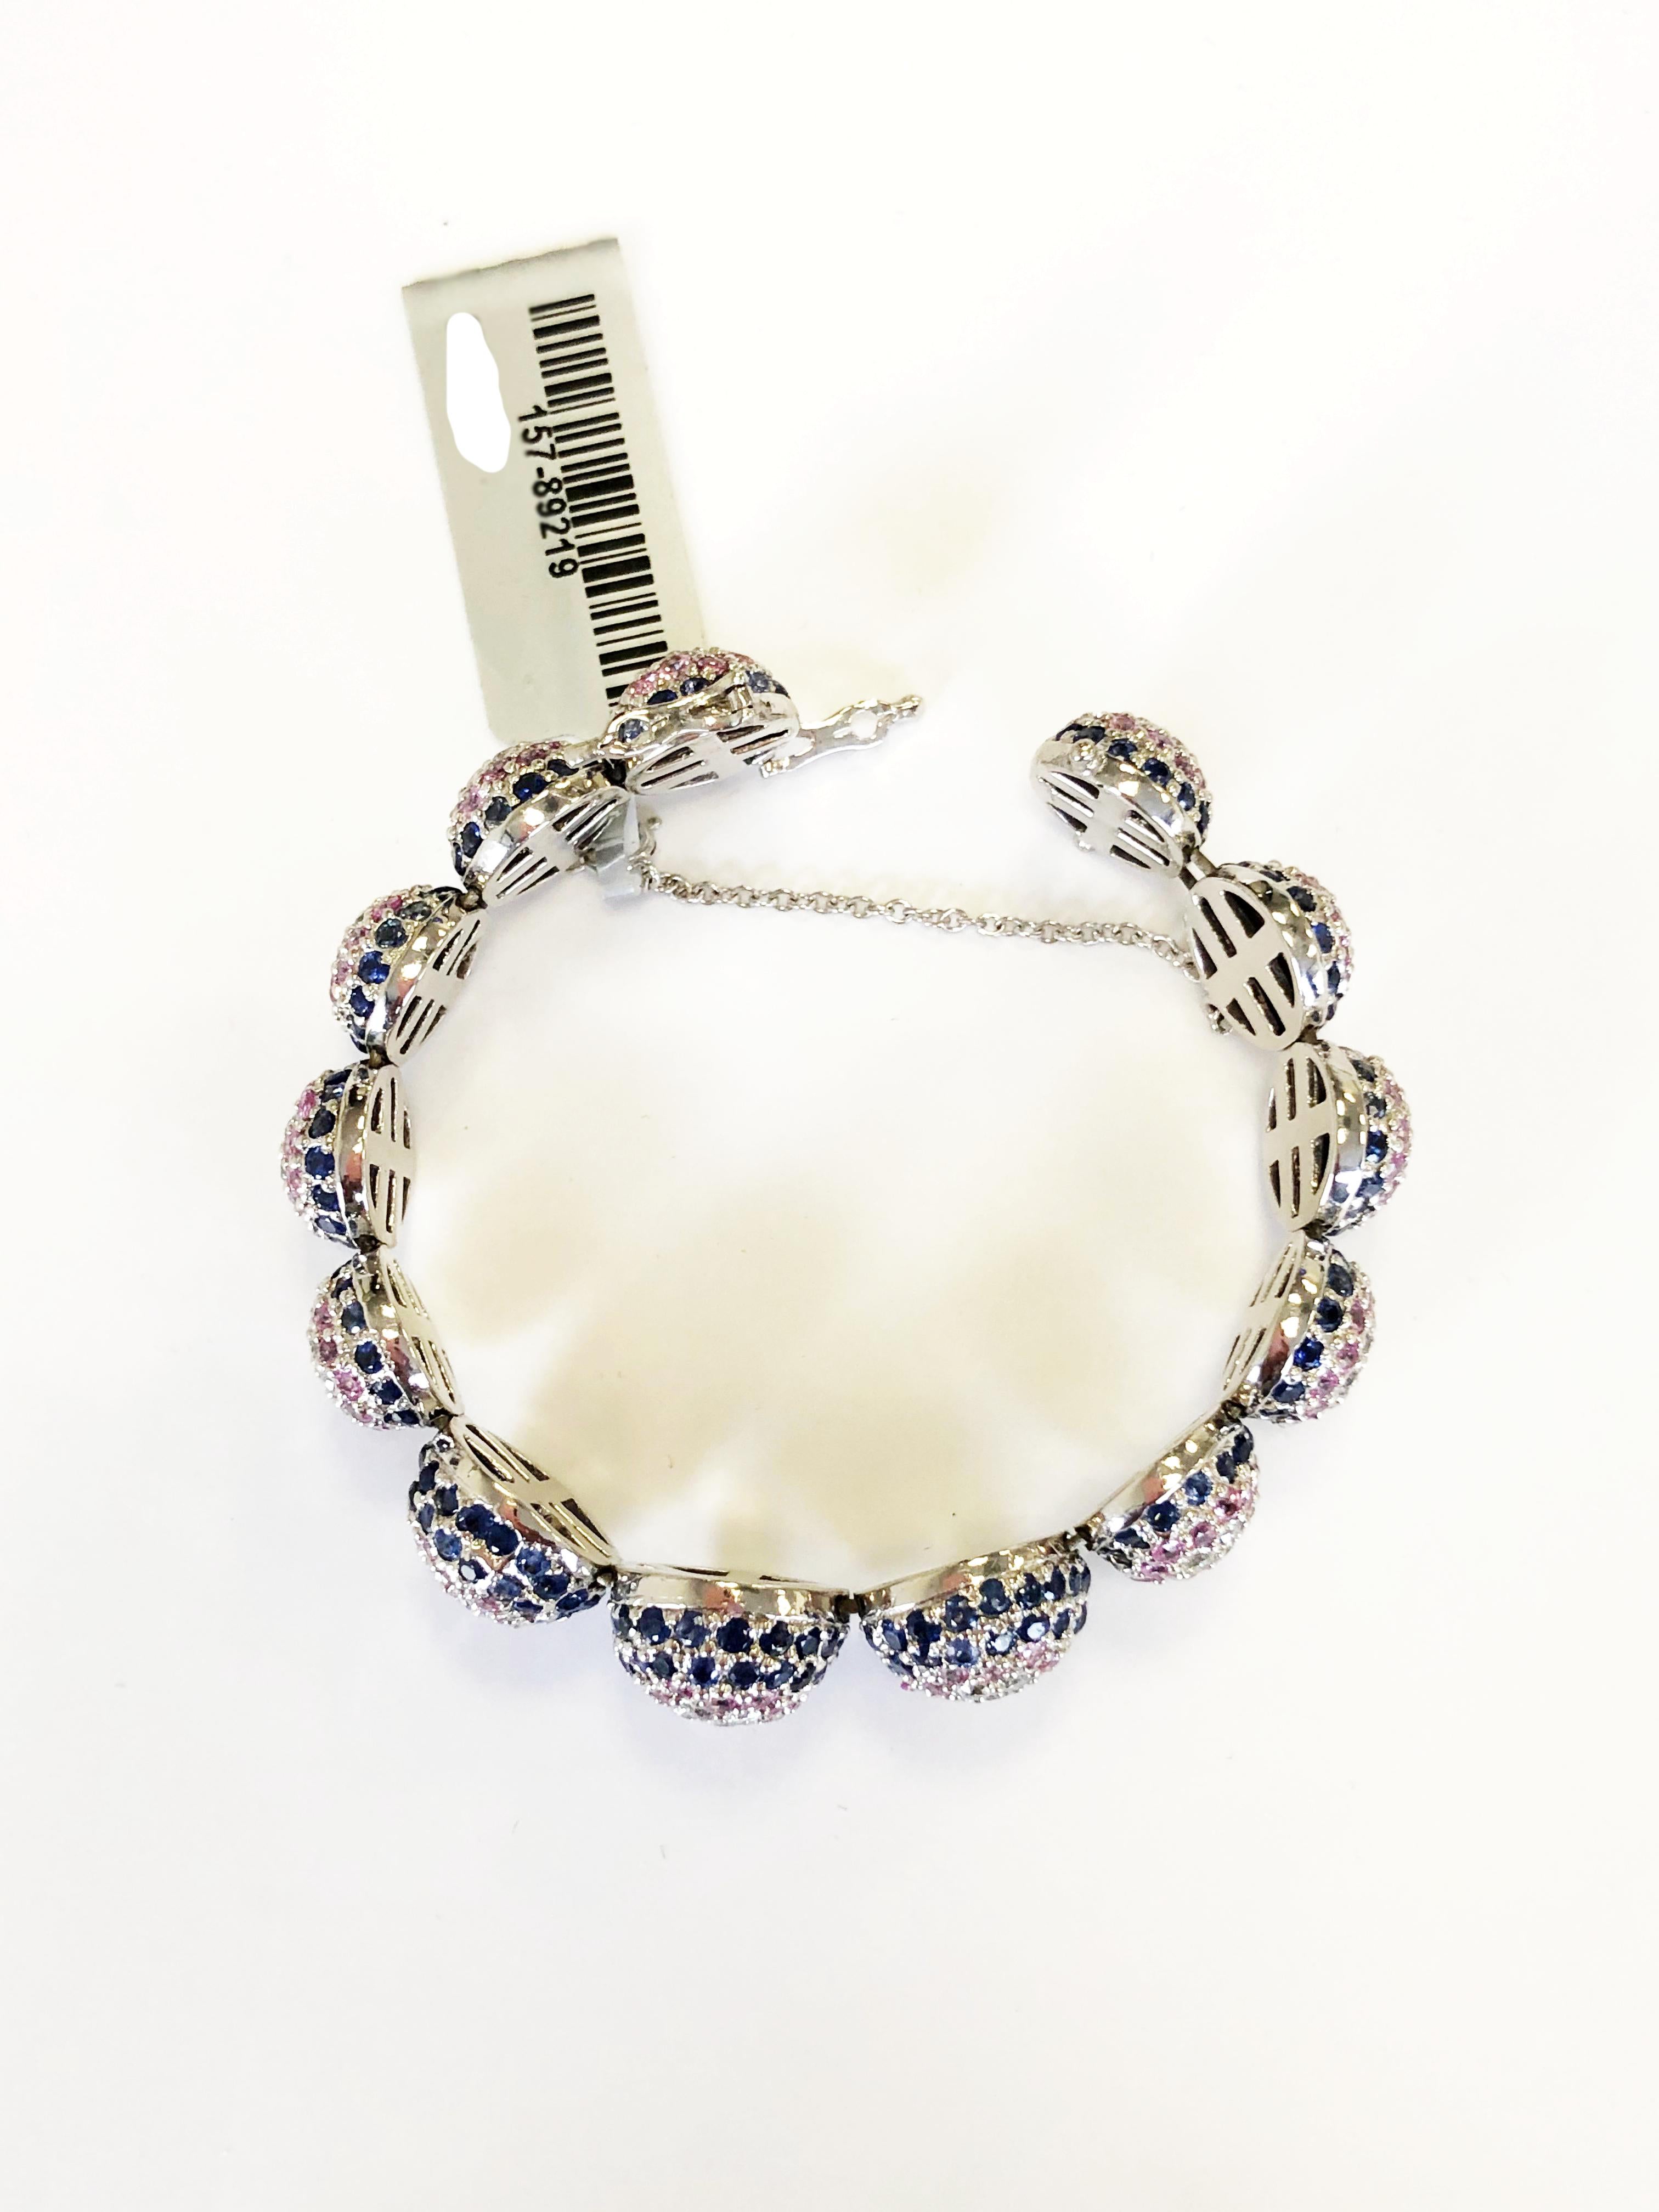 Pave pink and blue sapphire rounds with bright white diamond rounds in this beautiful 18k white gold bangle bracelet.  With a traditional safety chain and clasp, this piece is extra secure without compromising design.  Handmade beautifully.  Great